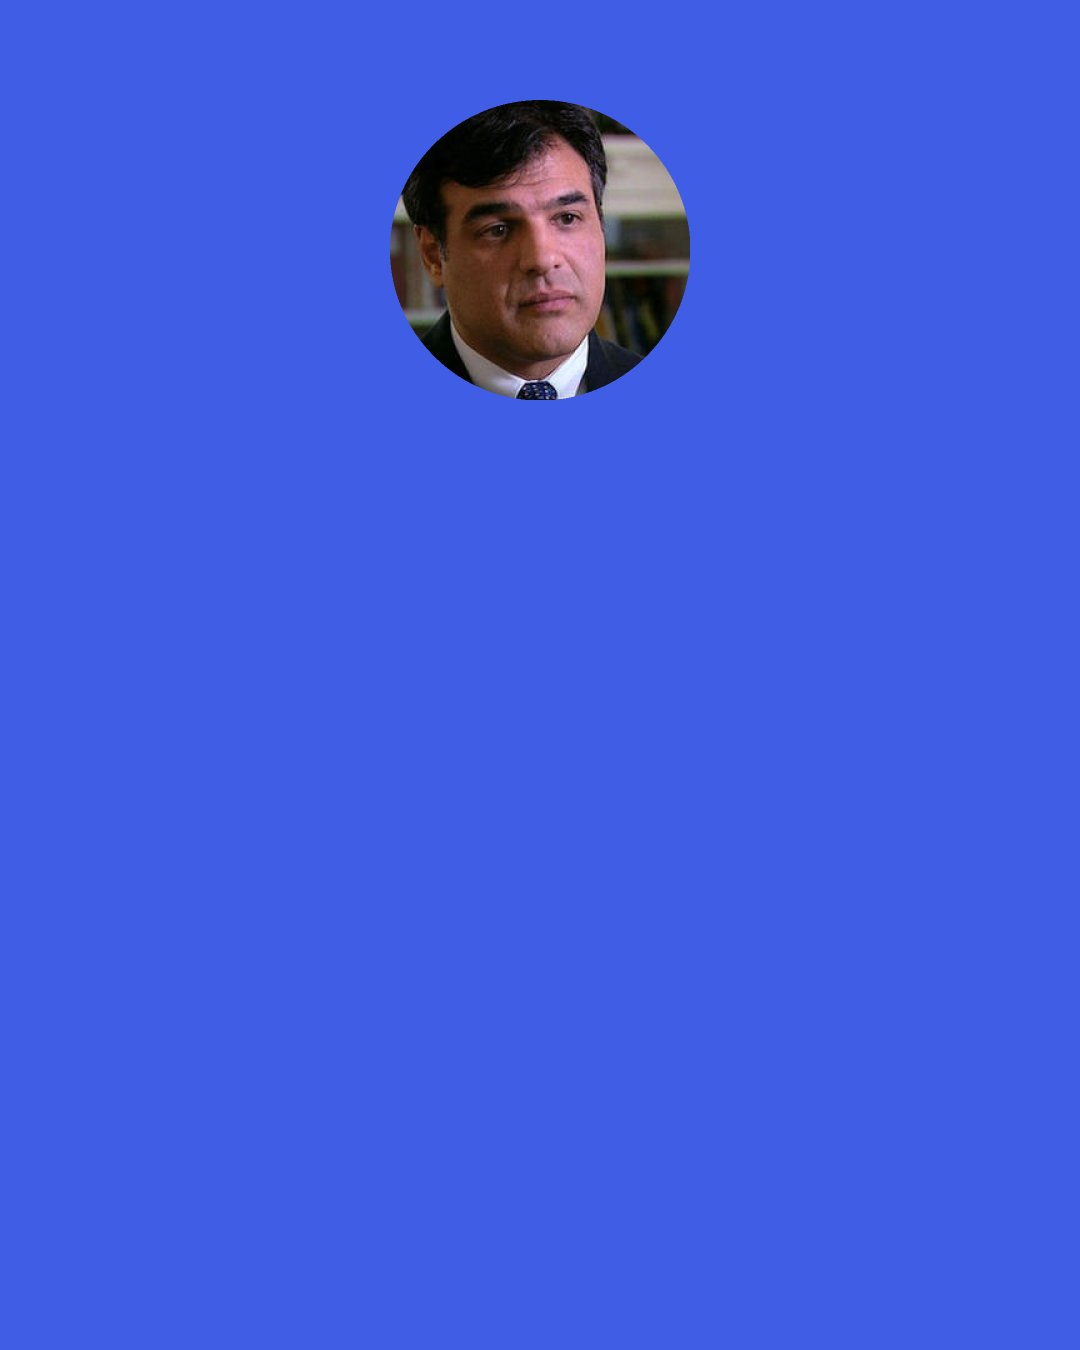 John Kiriakou: It's much less romantic in that you have to go to www.cia.gov and click "Apply Now." For me it was much more clandestine.